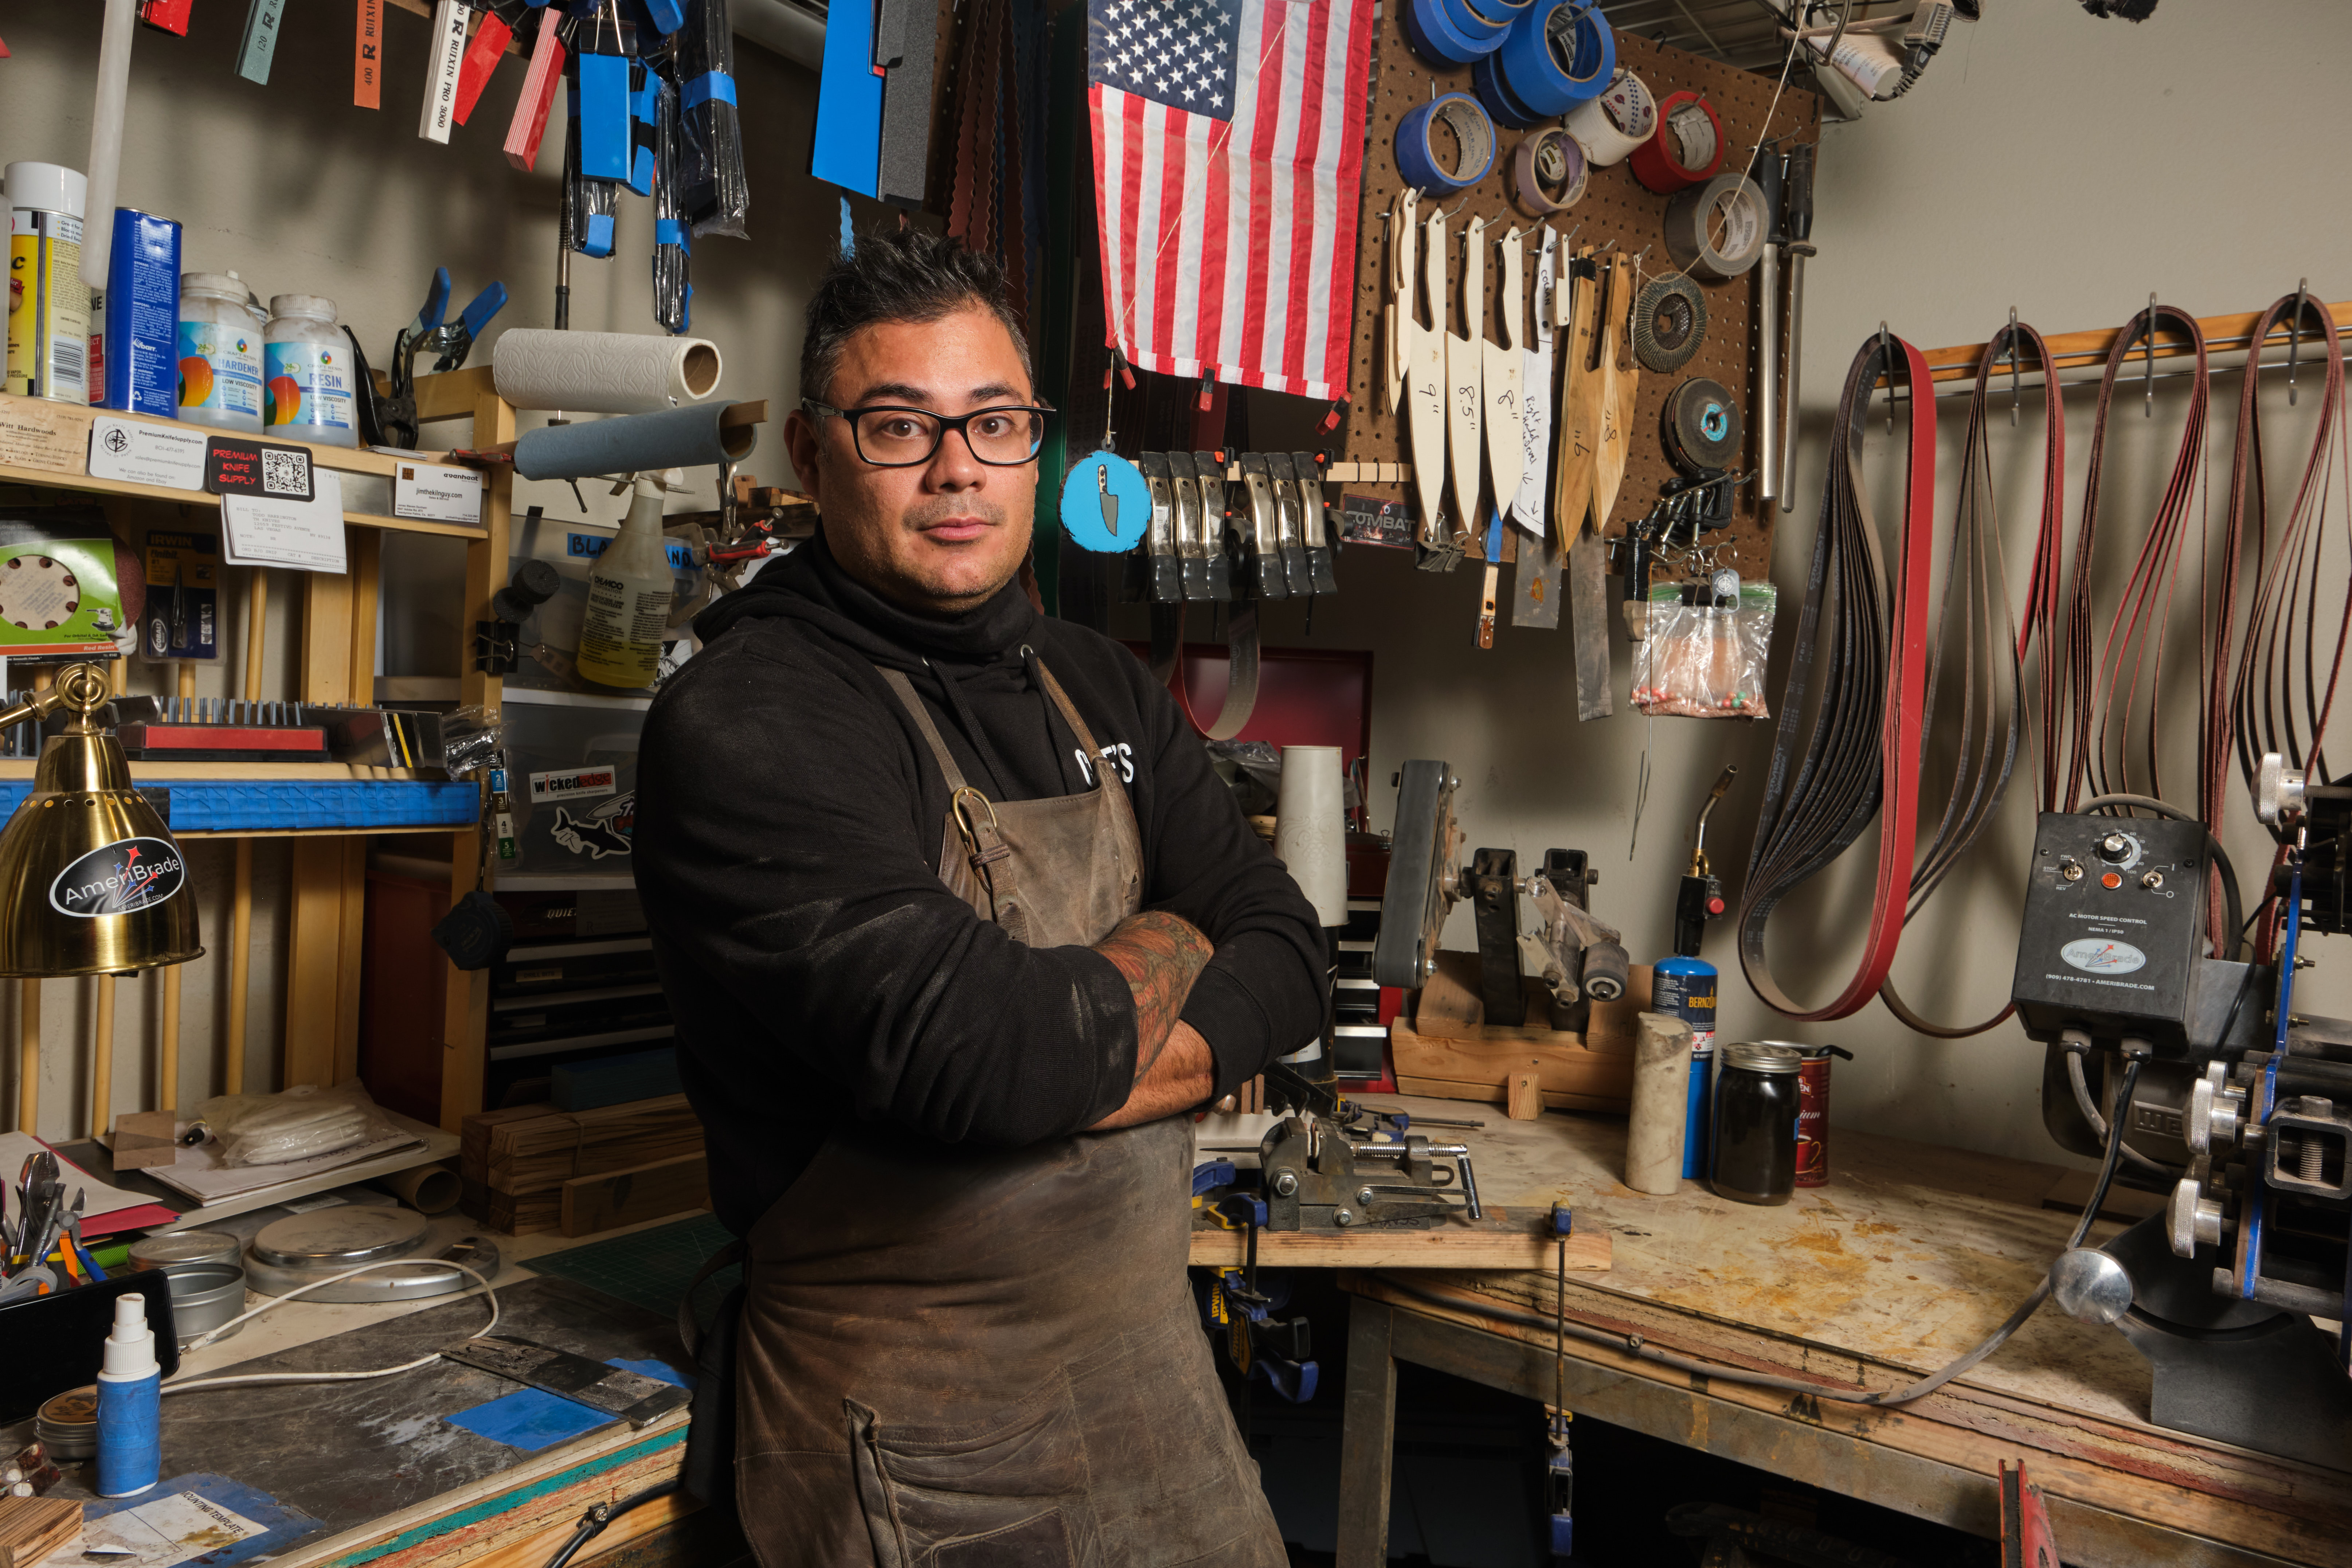 A man stands in his knife studio